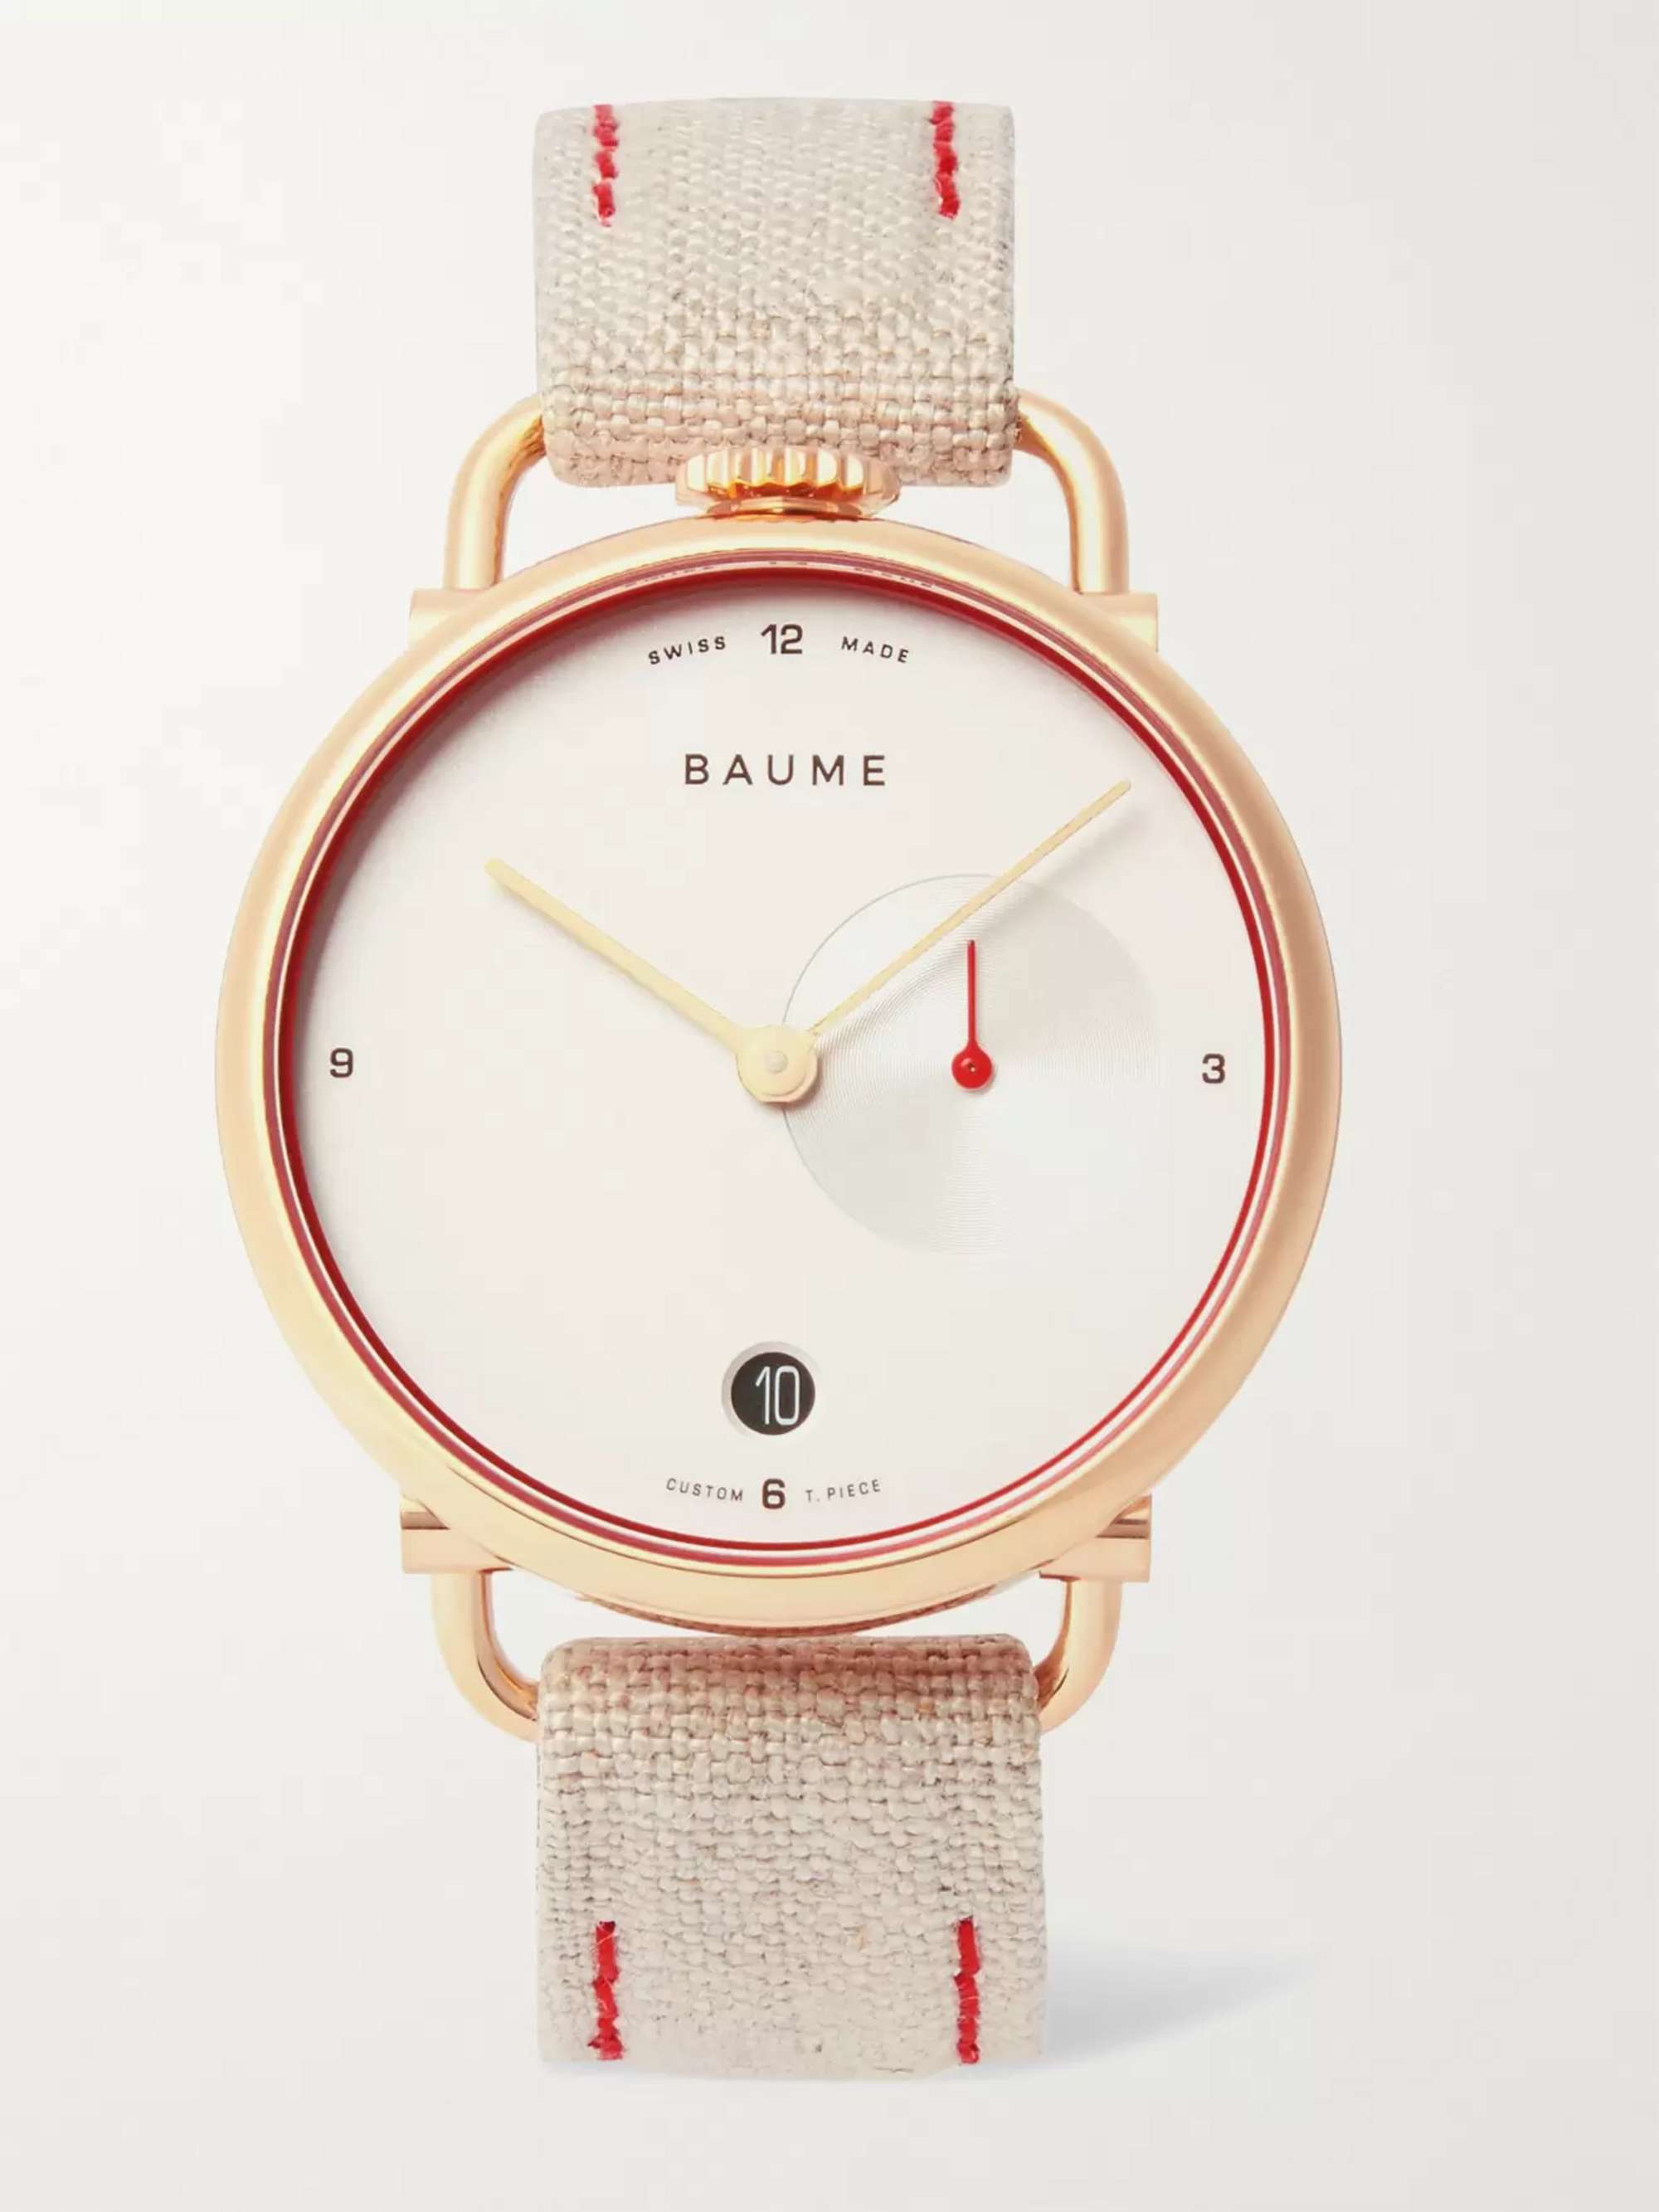 BAUME 35mm PVD-Coated Stainless Steel and Linen-Webbing Watch, Ref. No. 10602